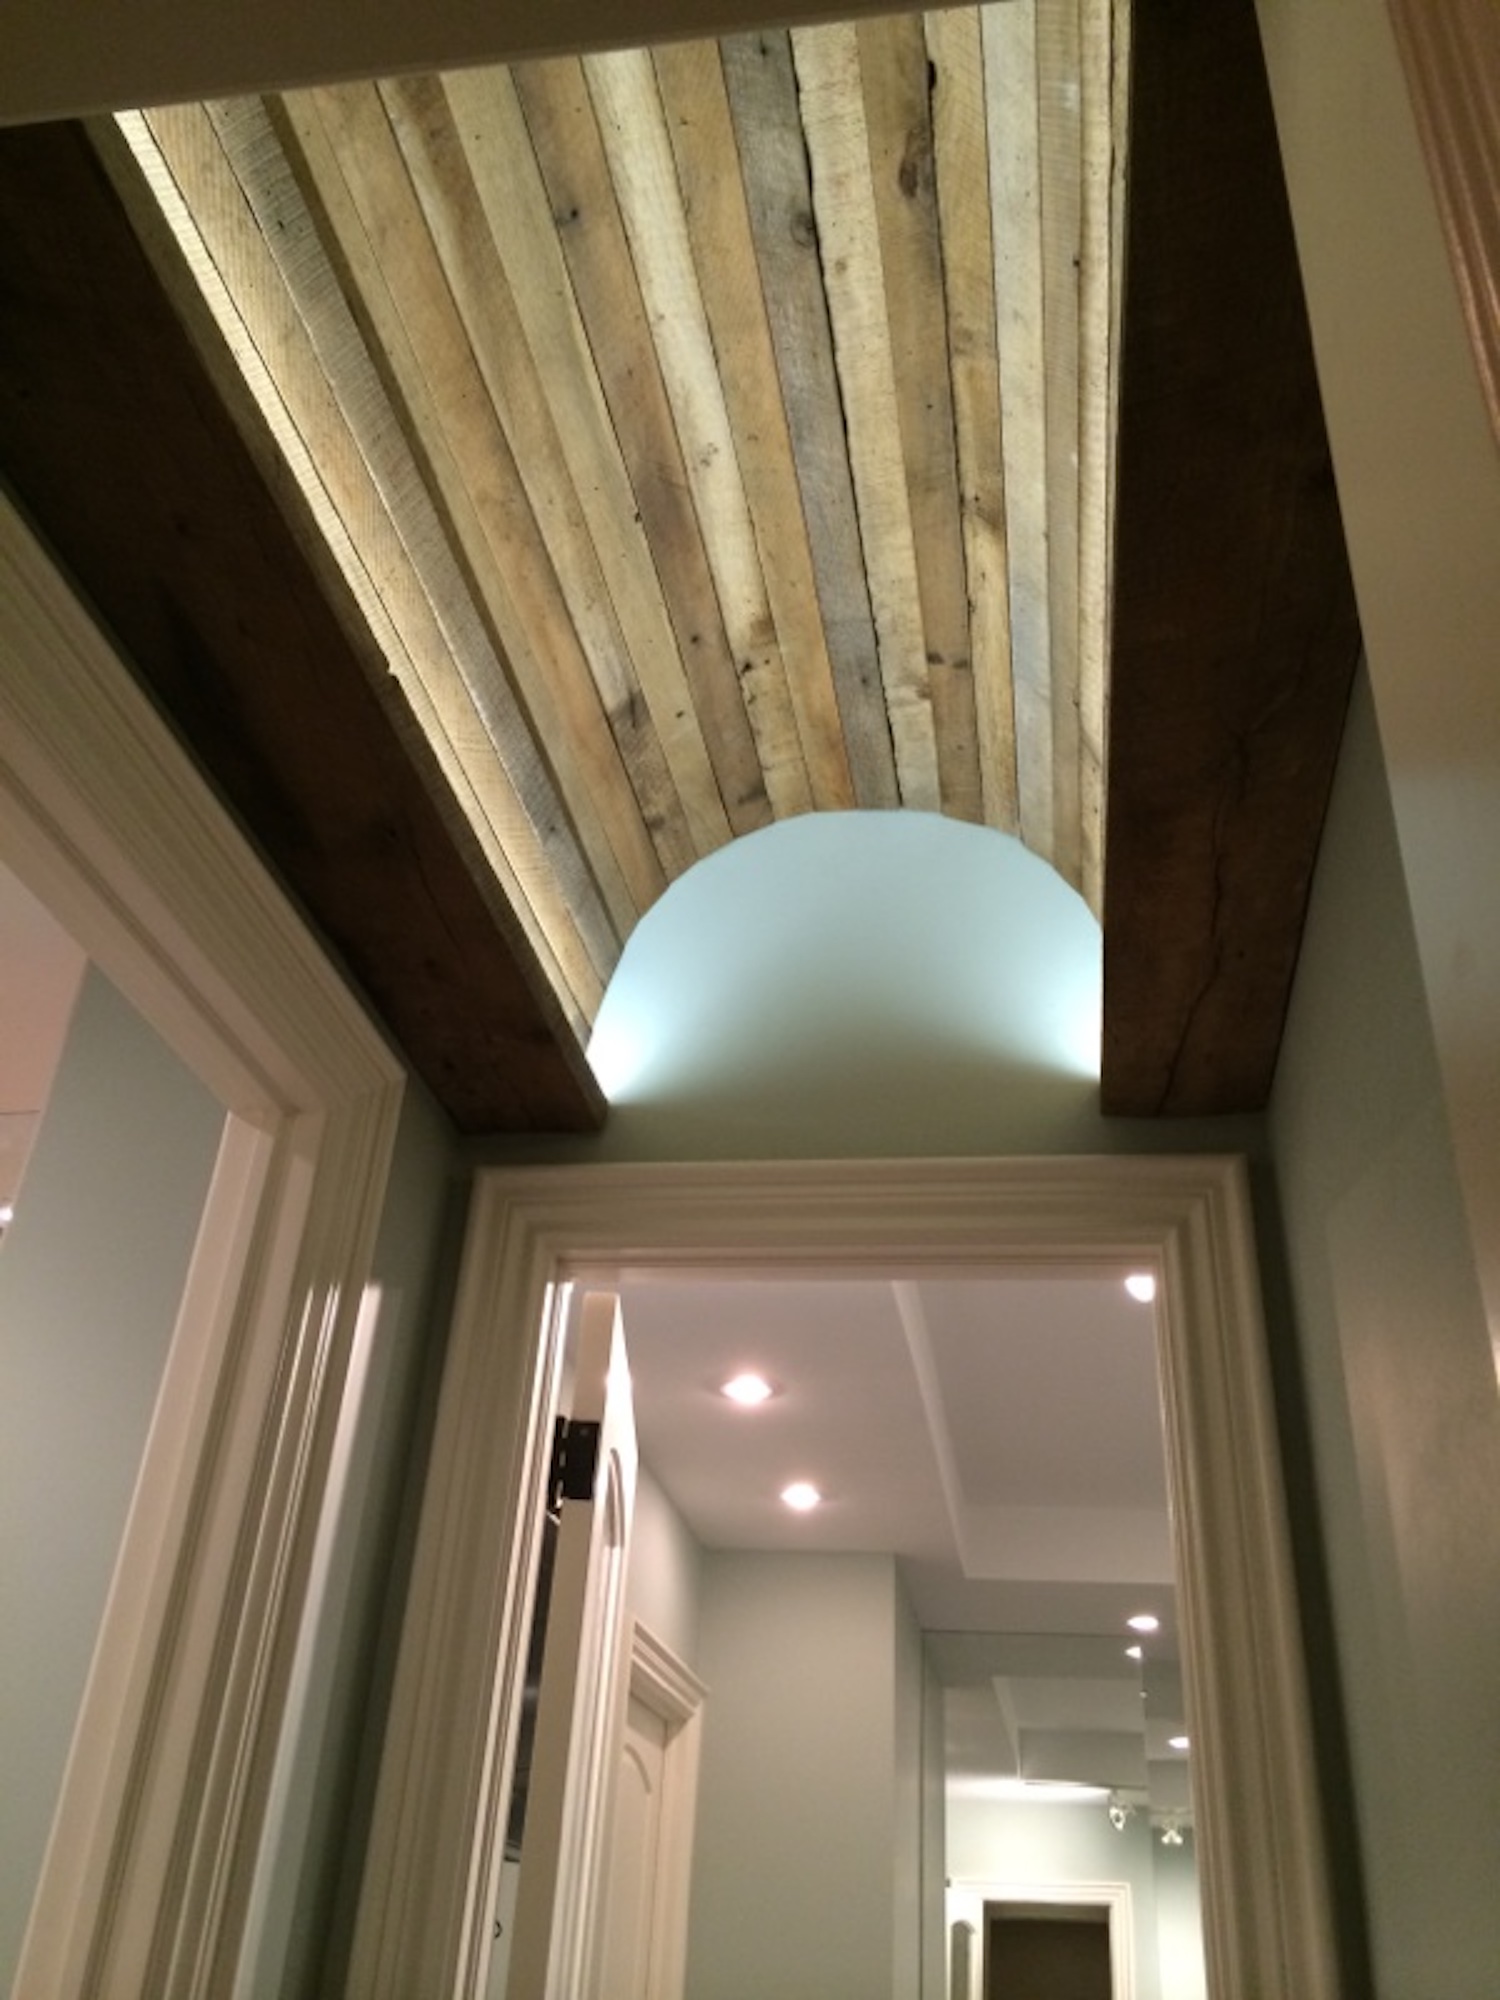 A barnwood ceiling in a customer's home